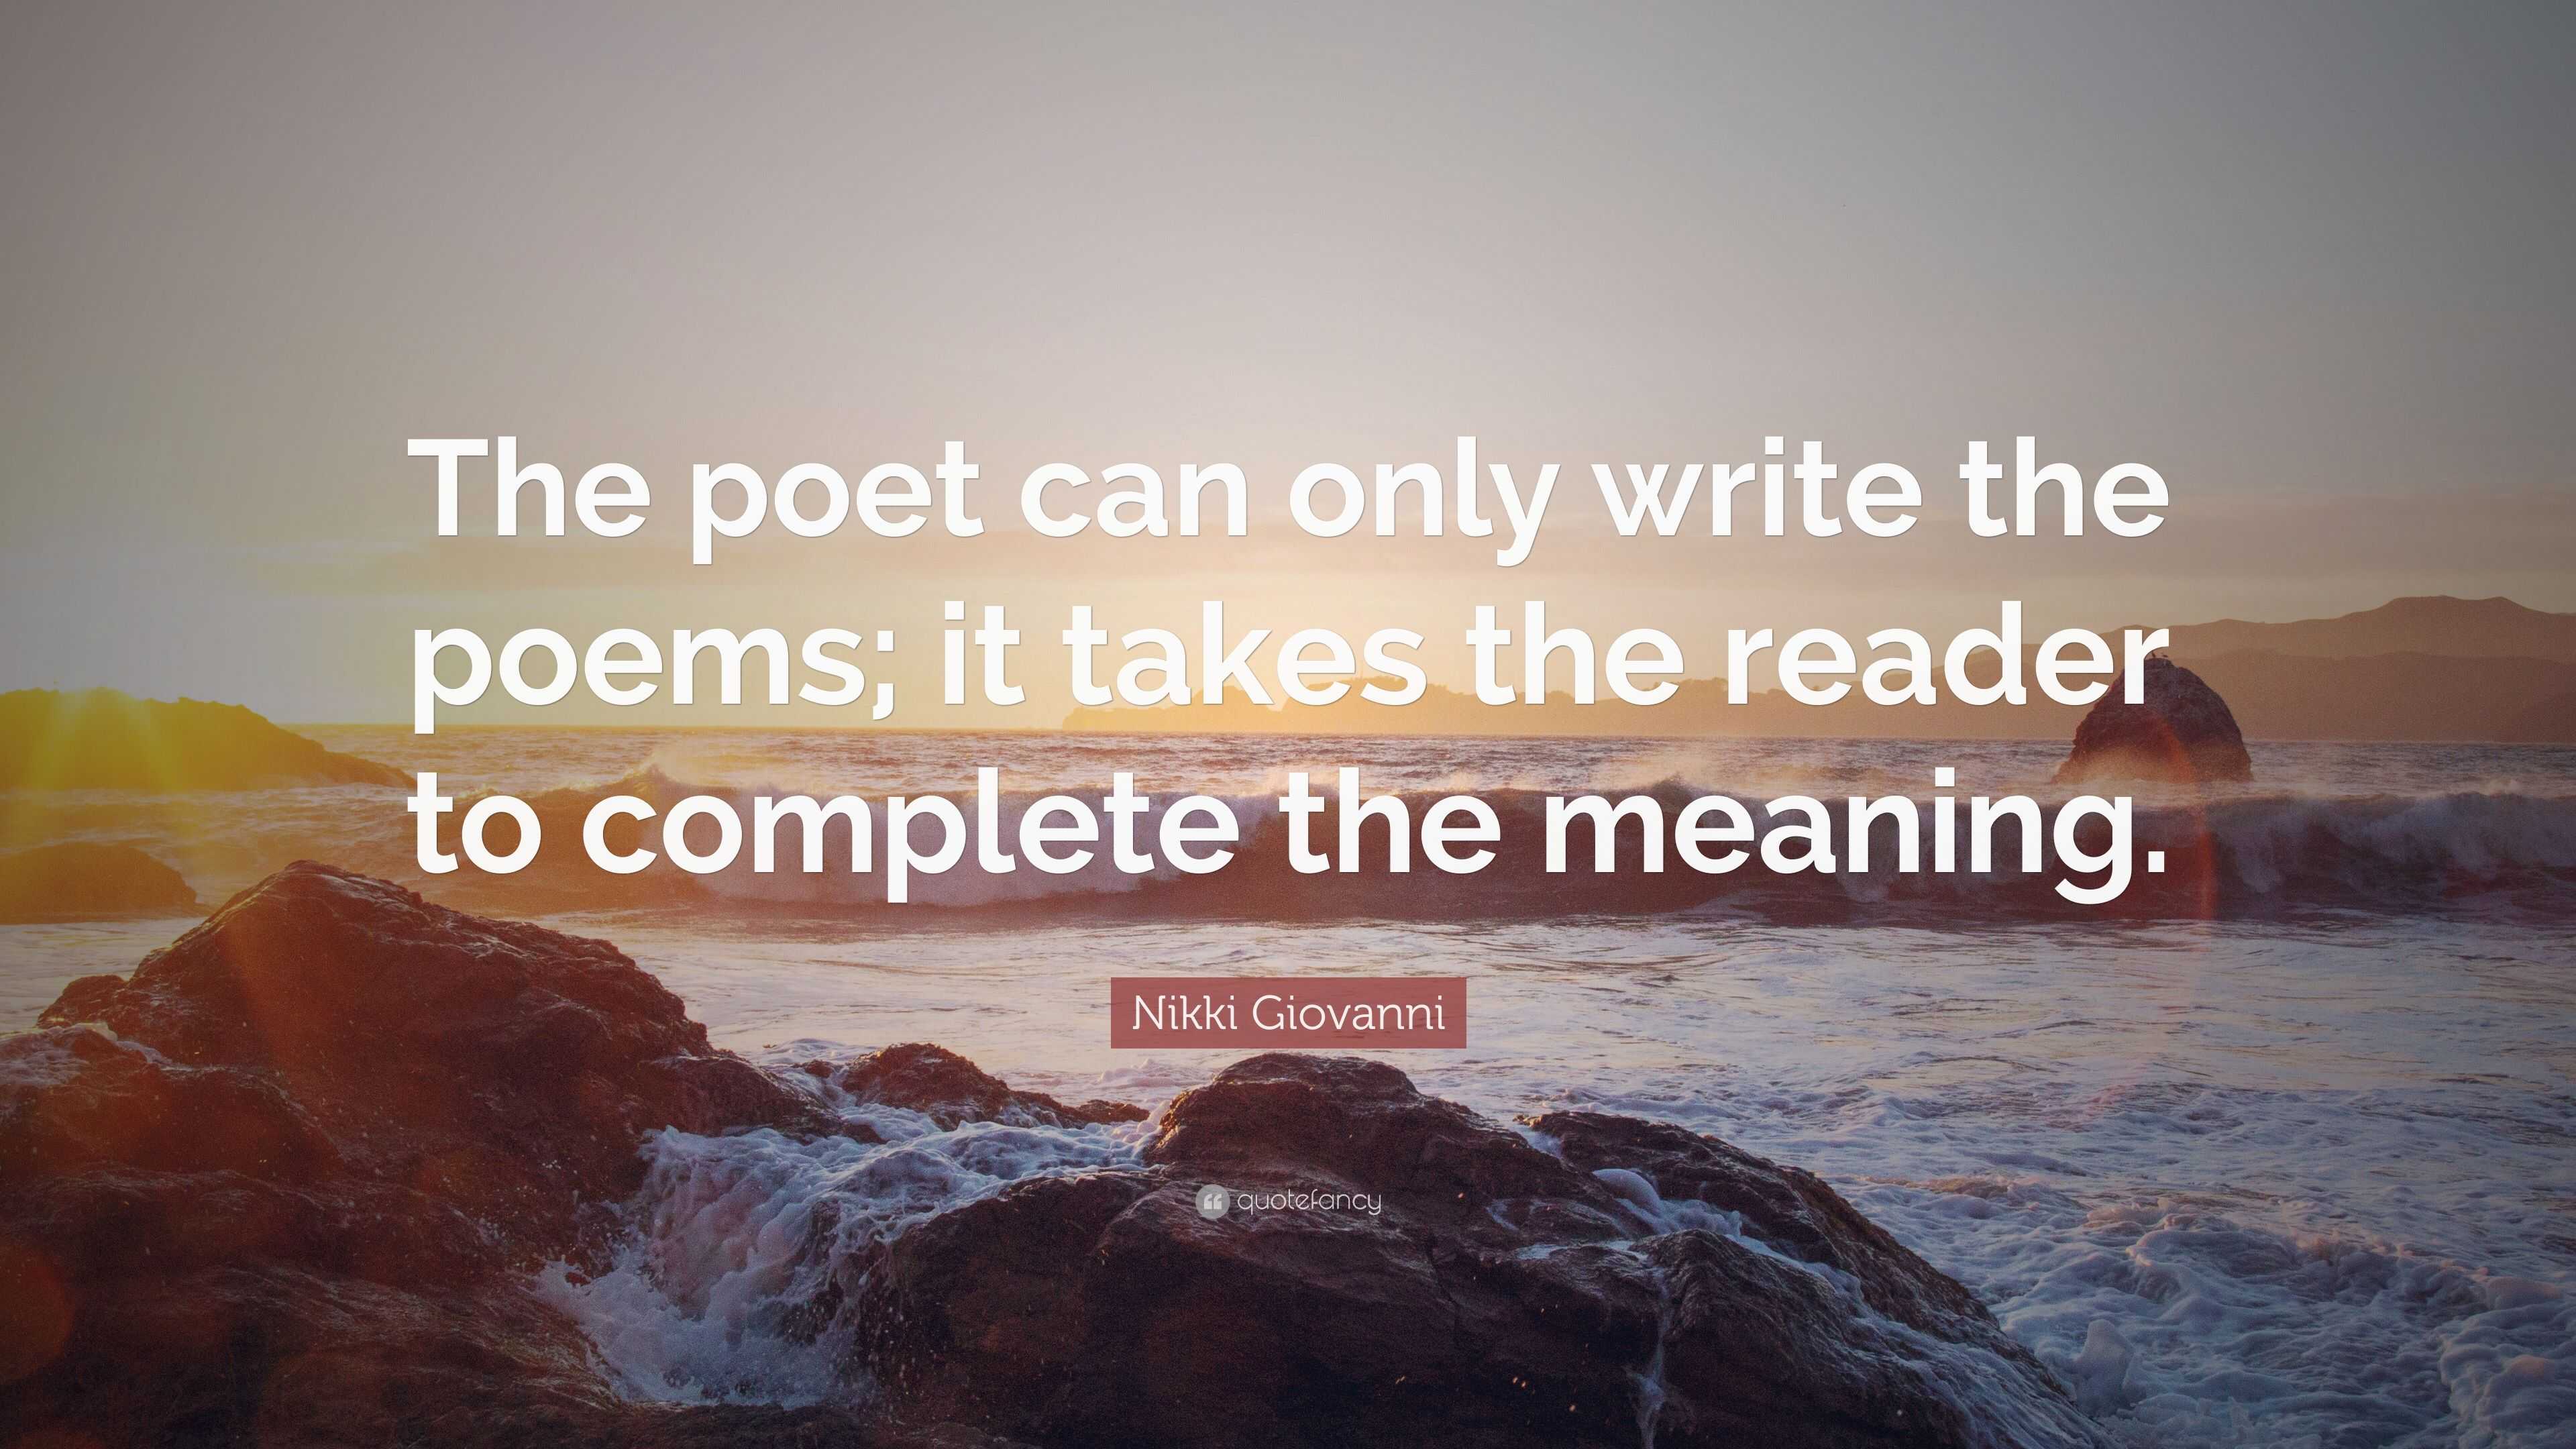 Nikki Giovanni Quote: “The poet can only write the poems; it takes the ...